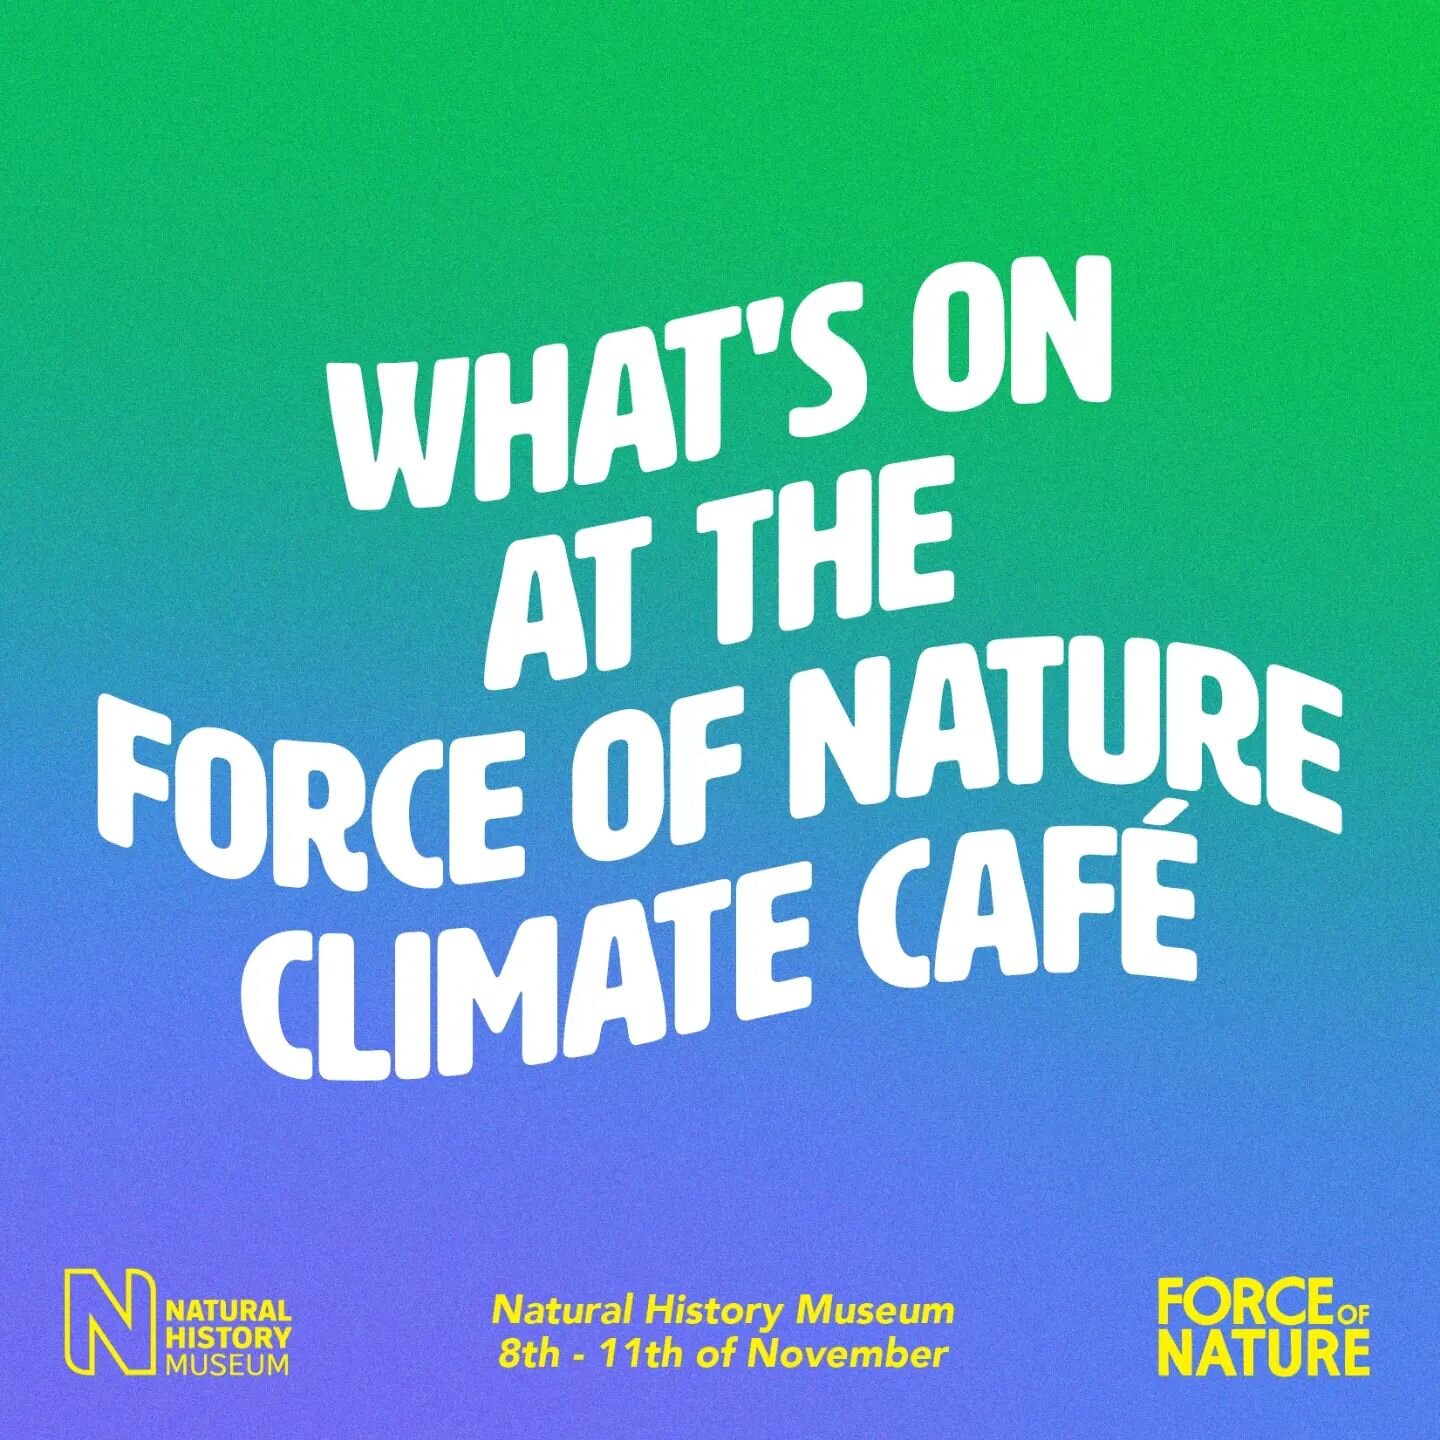 COP27 is just 2 days away...

As world leaders gather in Egypt to discuss the fate of our futures, we're hosting a climate caf&eacute; at the @natural_history_museum; a safe space for anyone to talk openly about the climate crisis and how it makes th